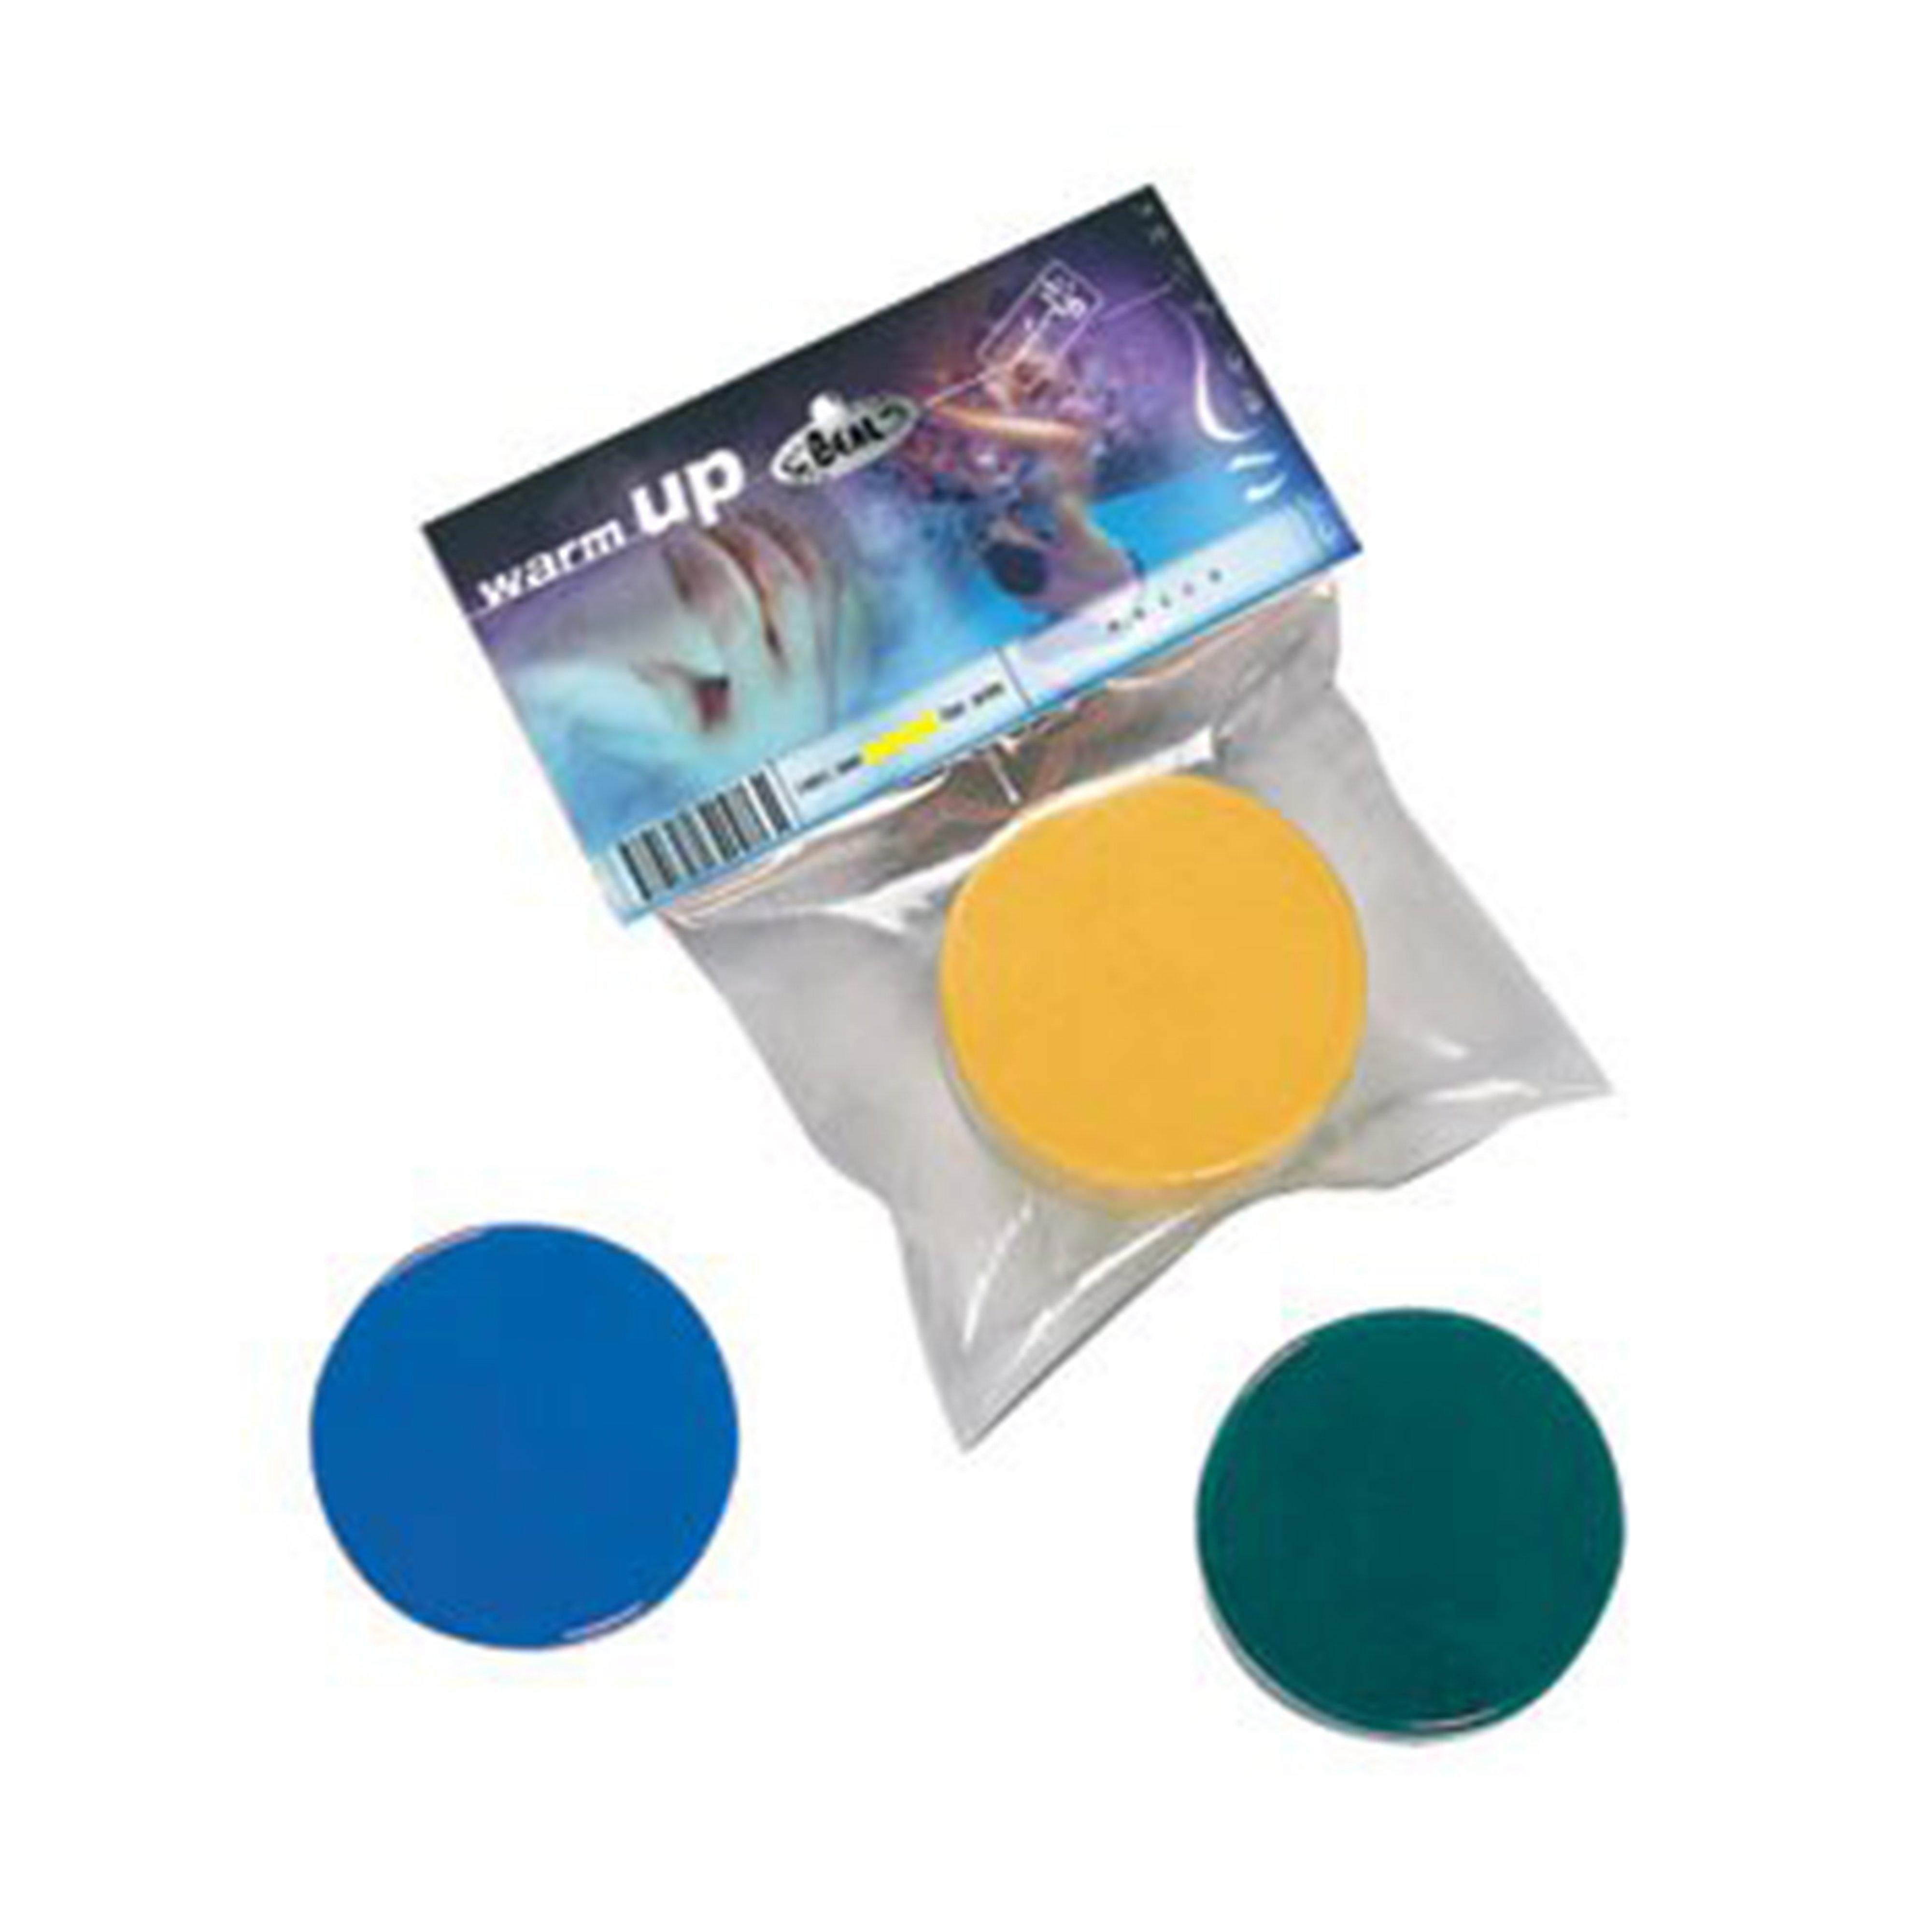 Beal Warm Up Putty Review